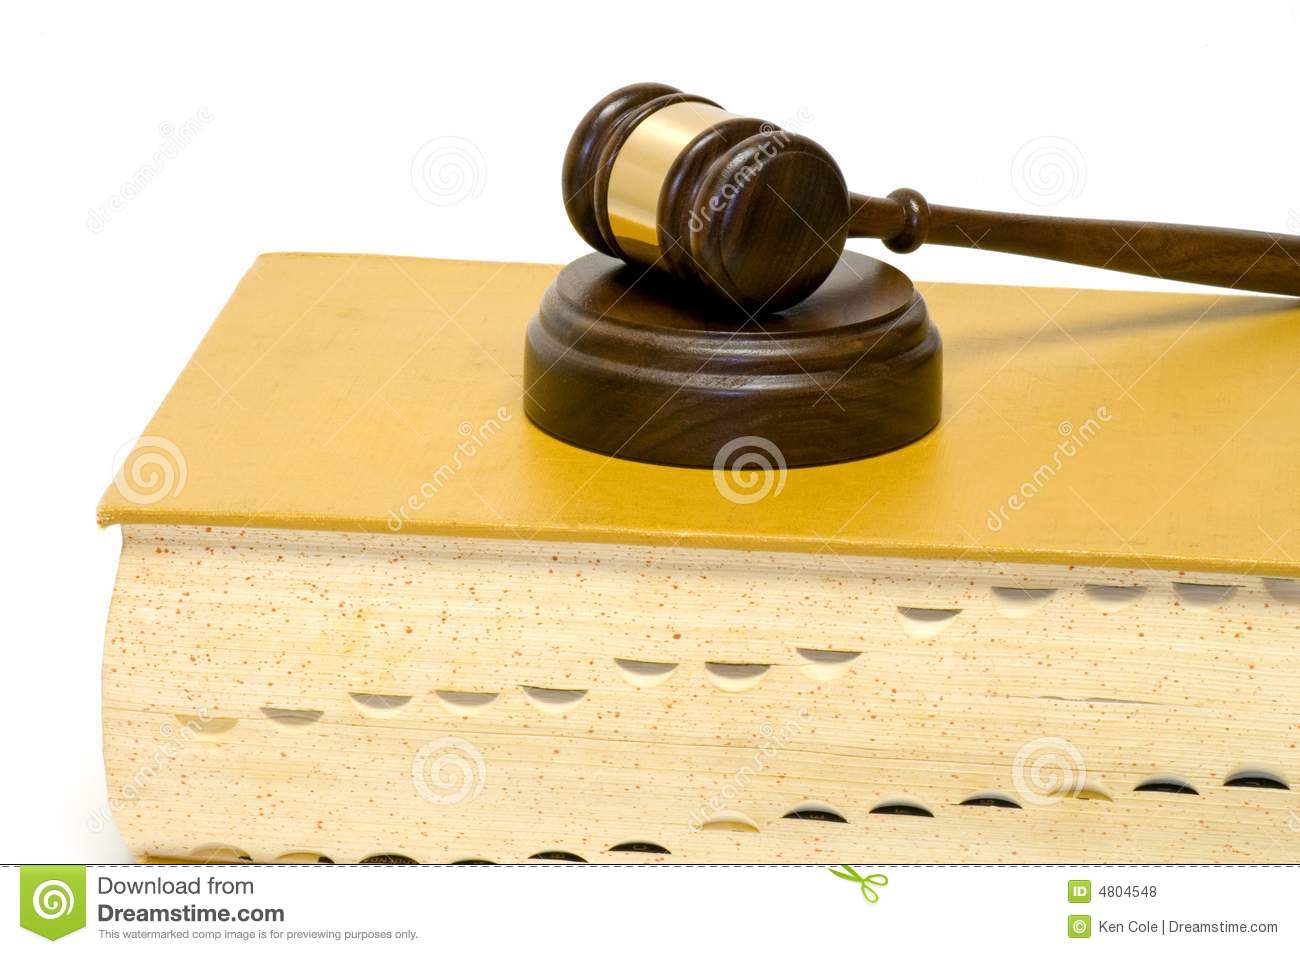 Wooden Gavel And Sounding Block Resting On A Large Indexed Law Book    